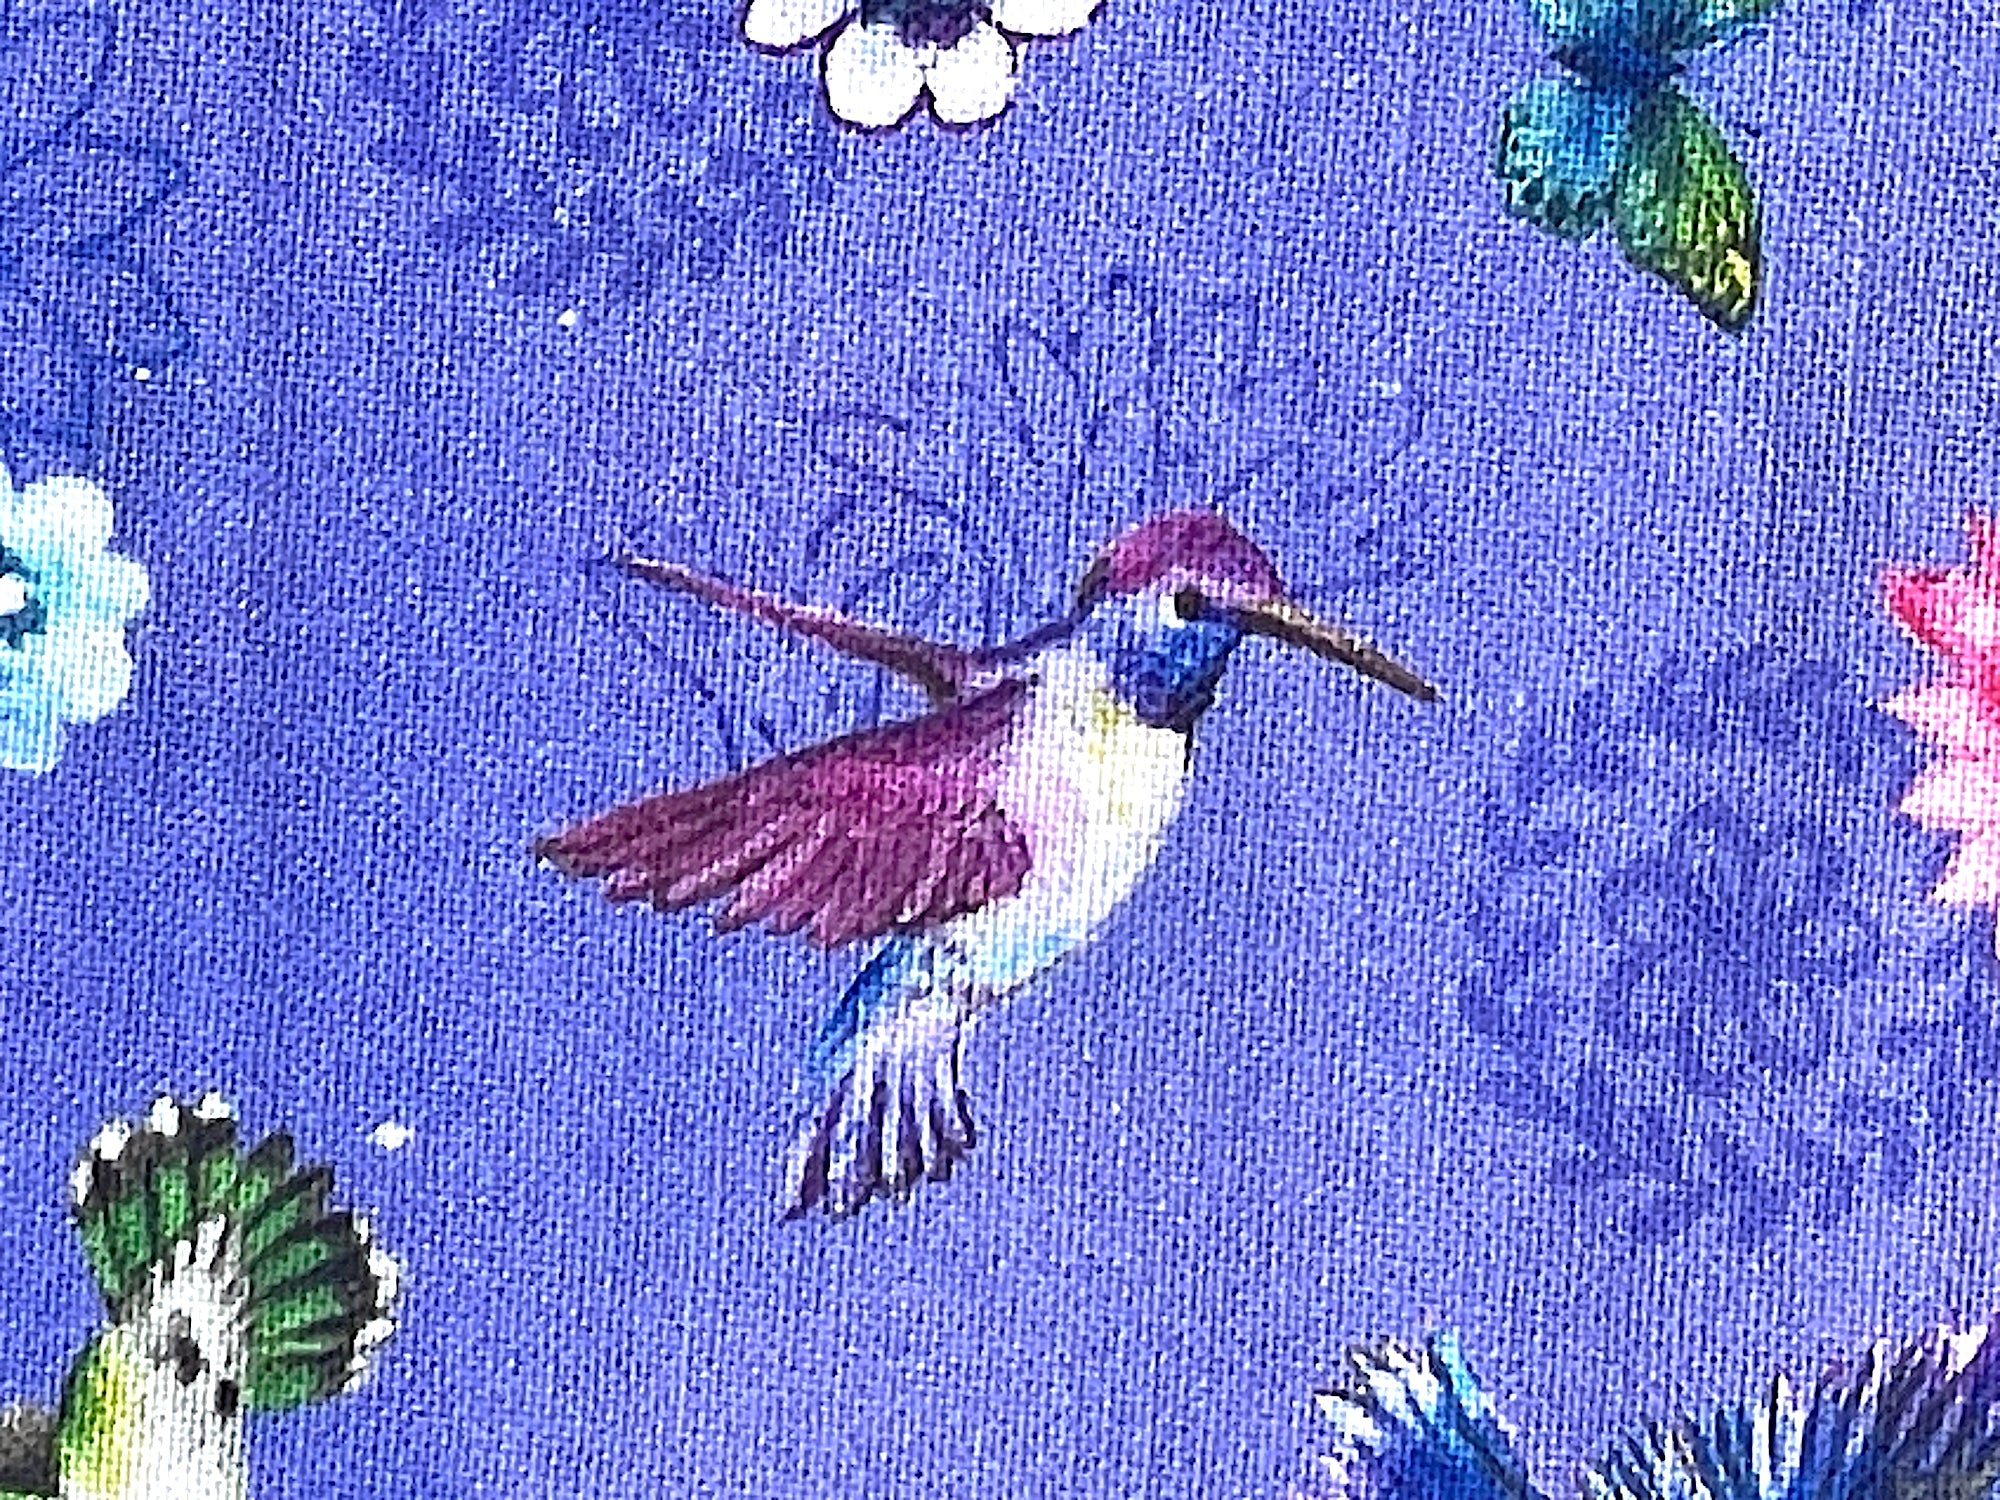 Close up of a purple, blue and white hummingbird.